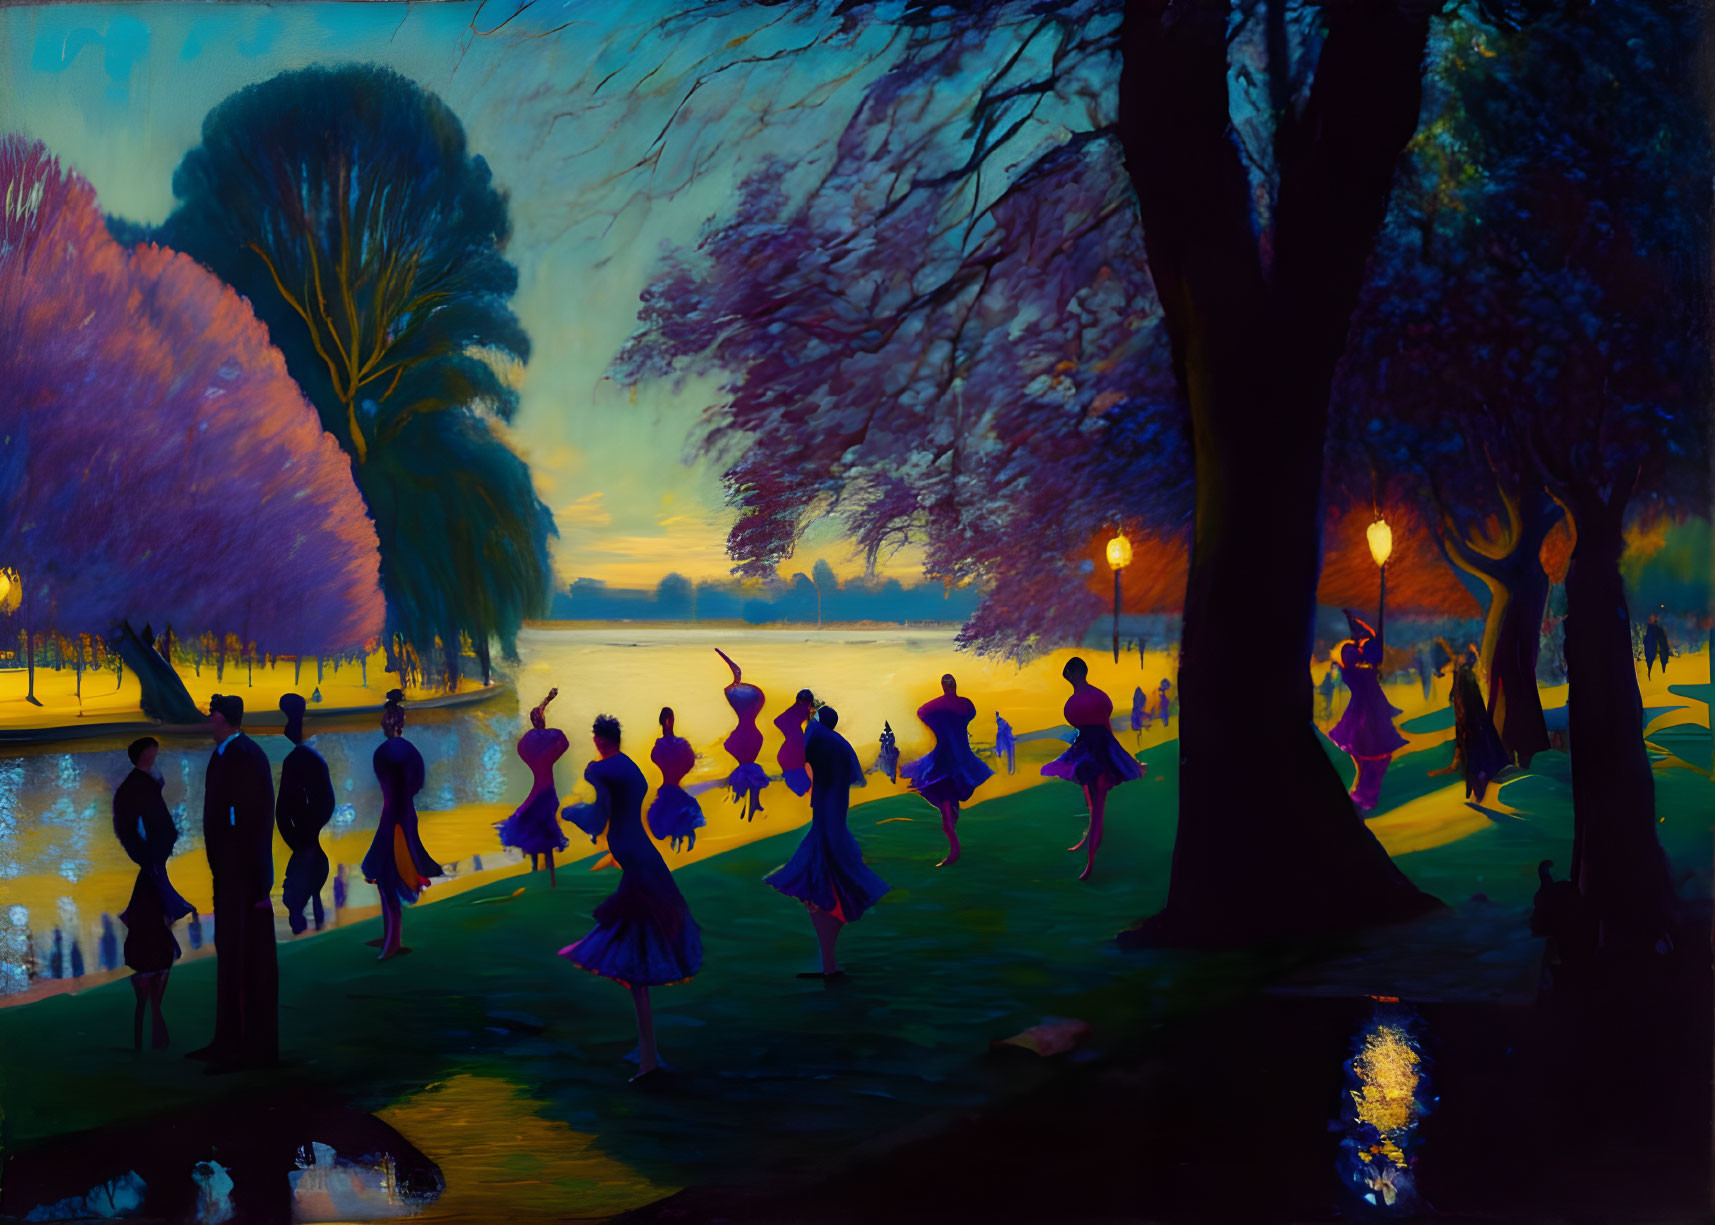 Twilight painting of dancers by lakeside with glowing street lamps